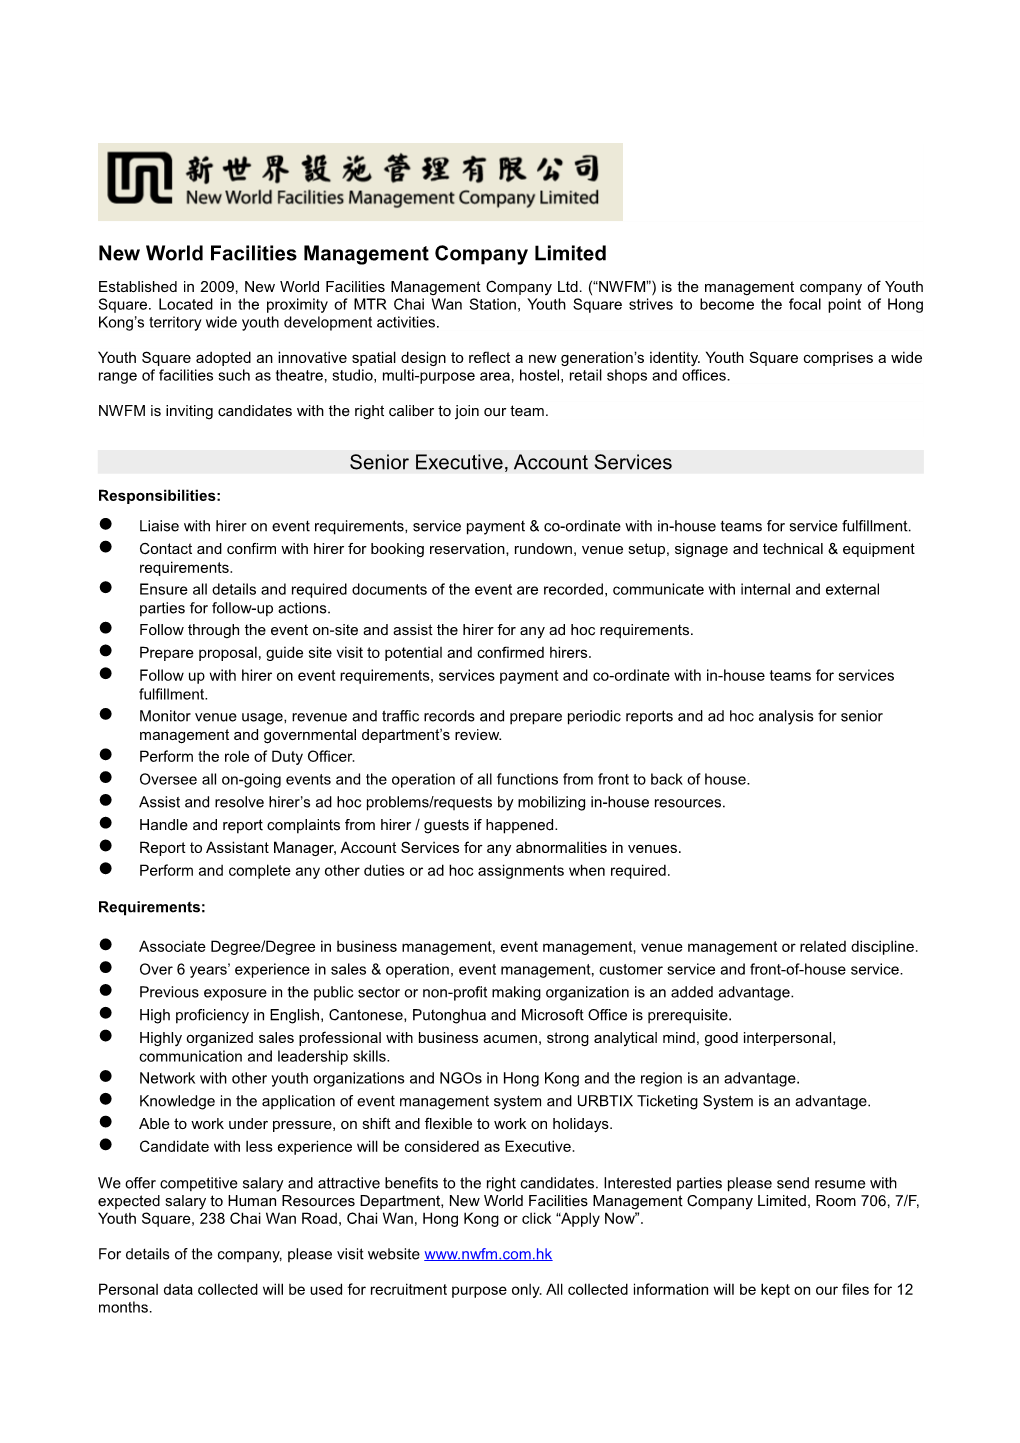 New World Facilities Management Company Limited